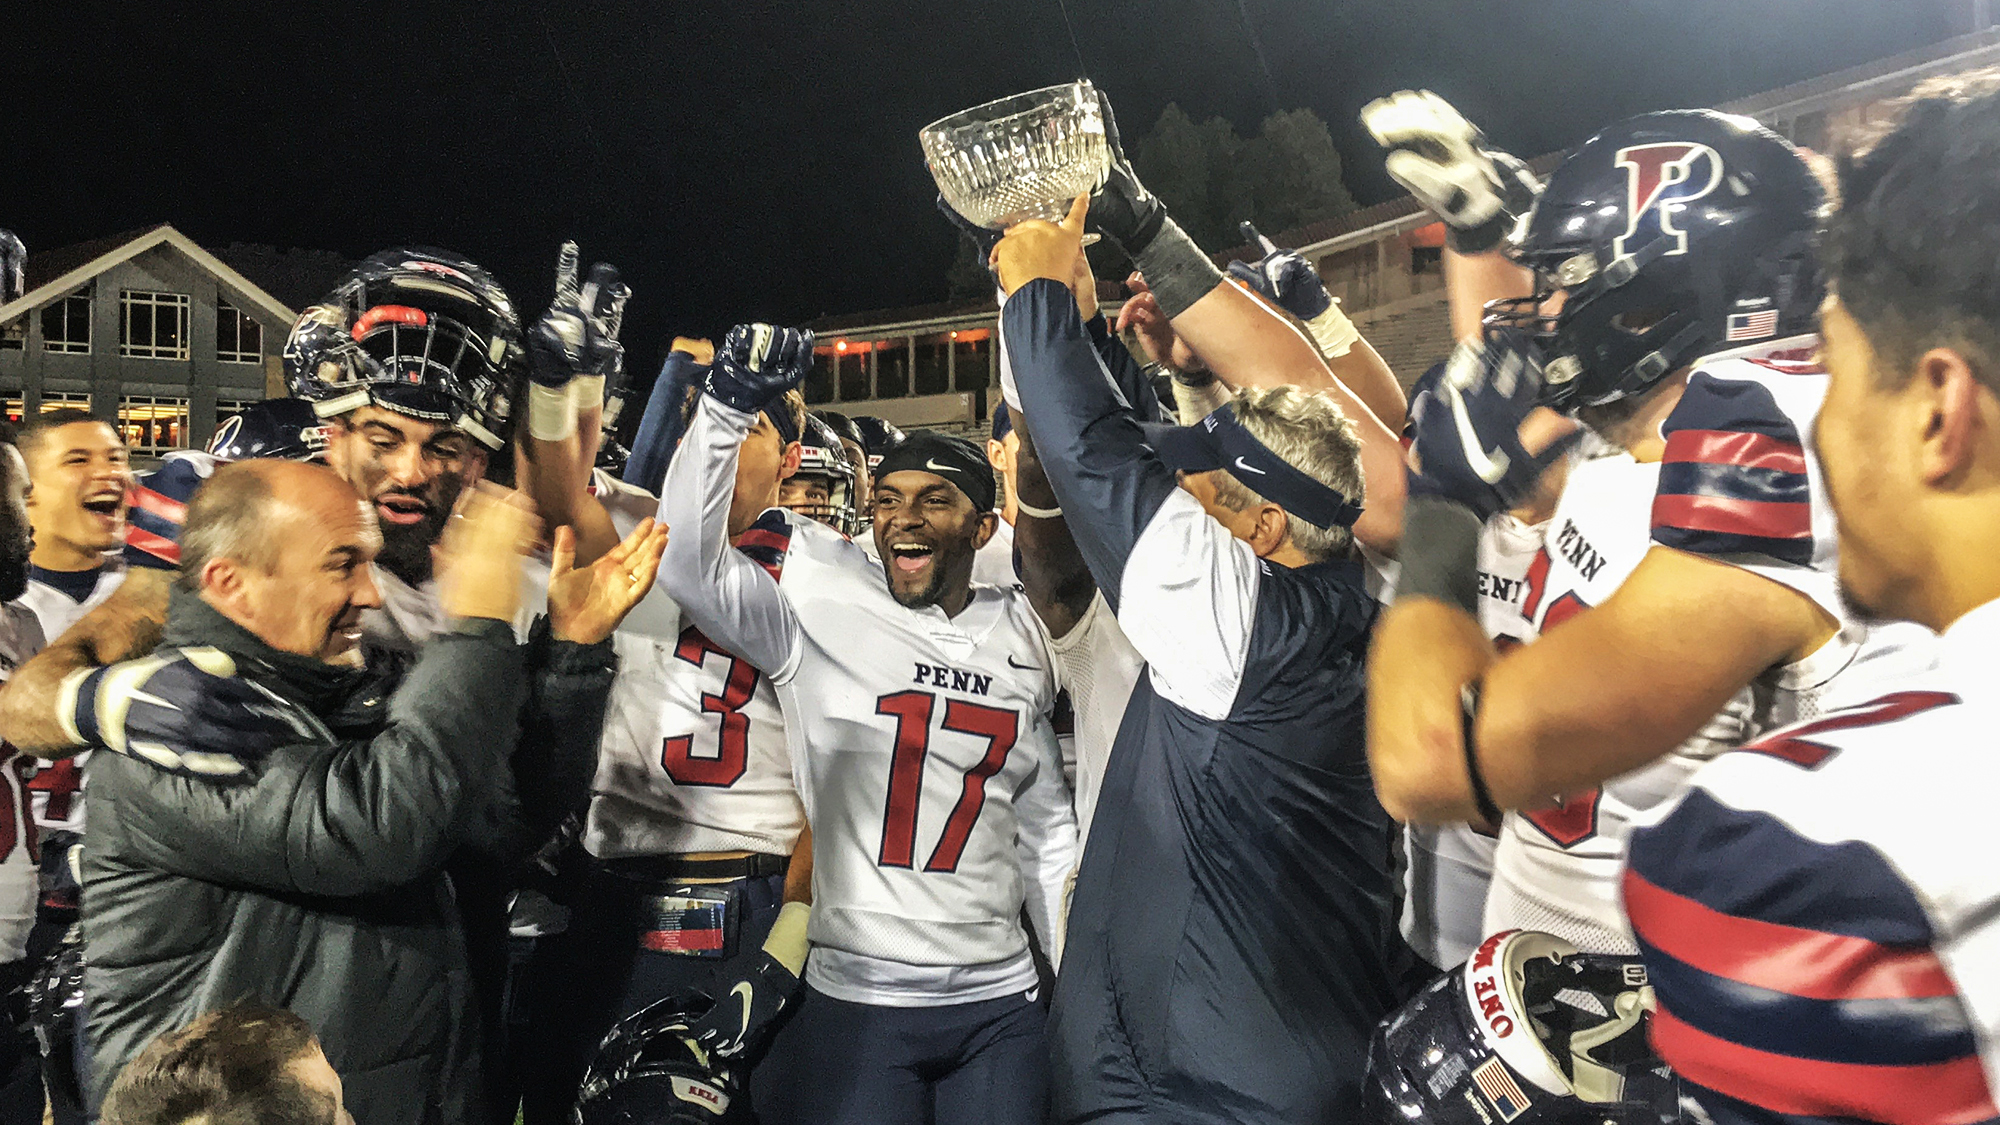 Penn football players hold up trophy after beating Cornell